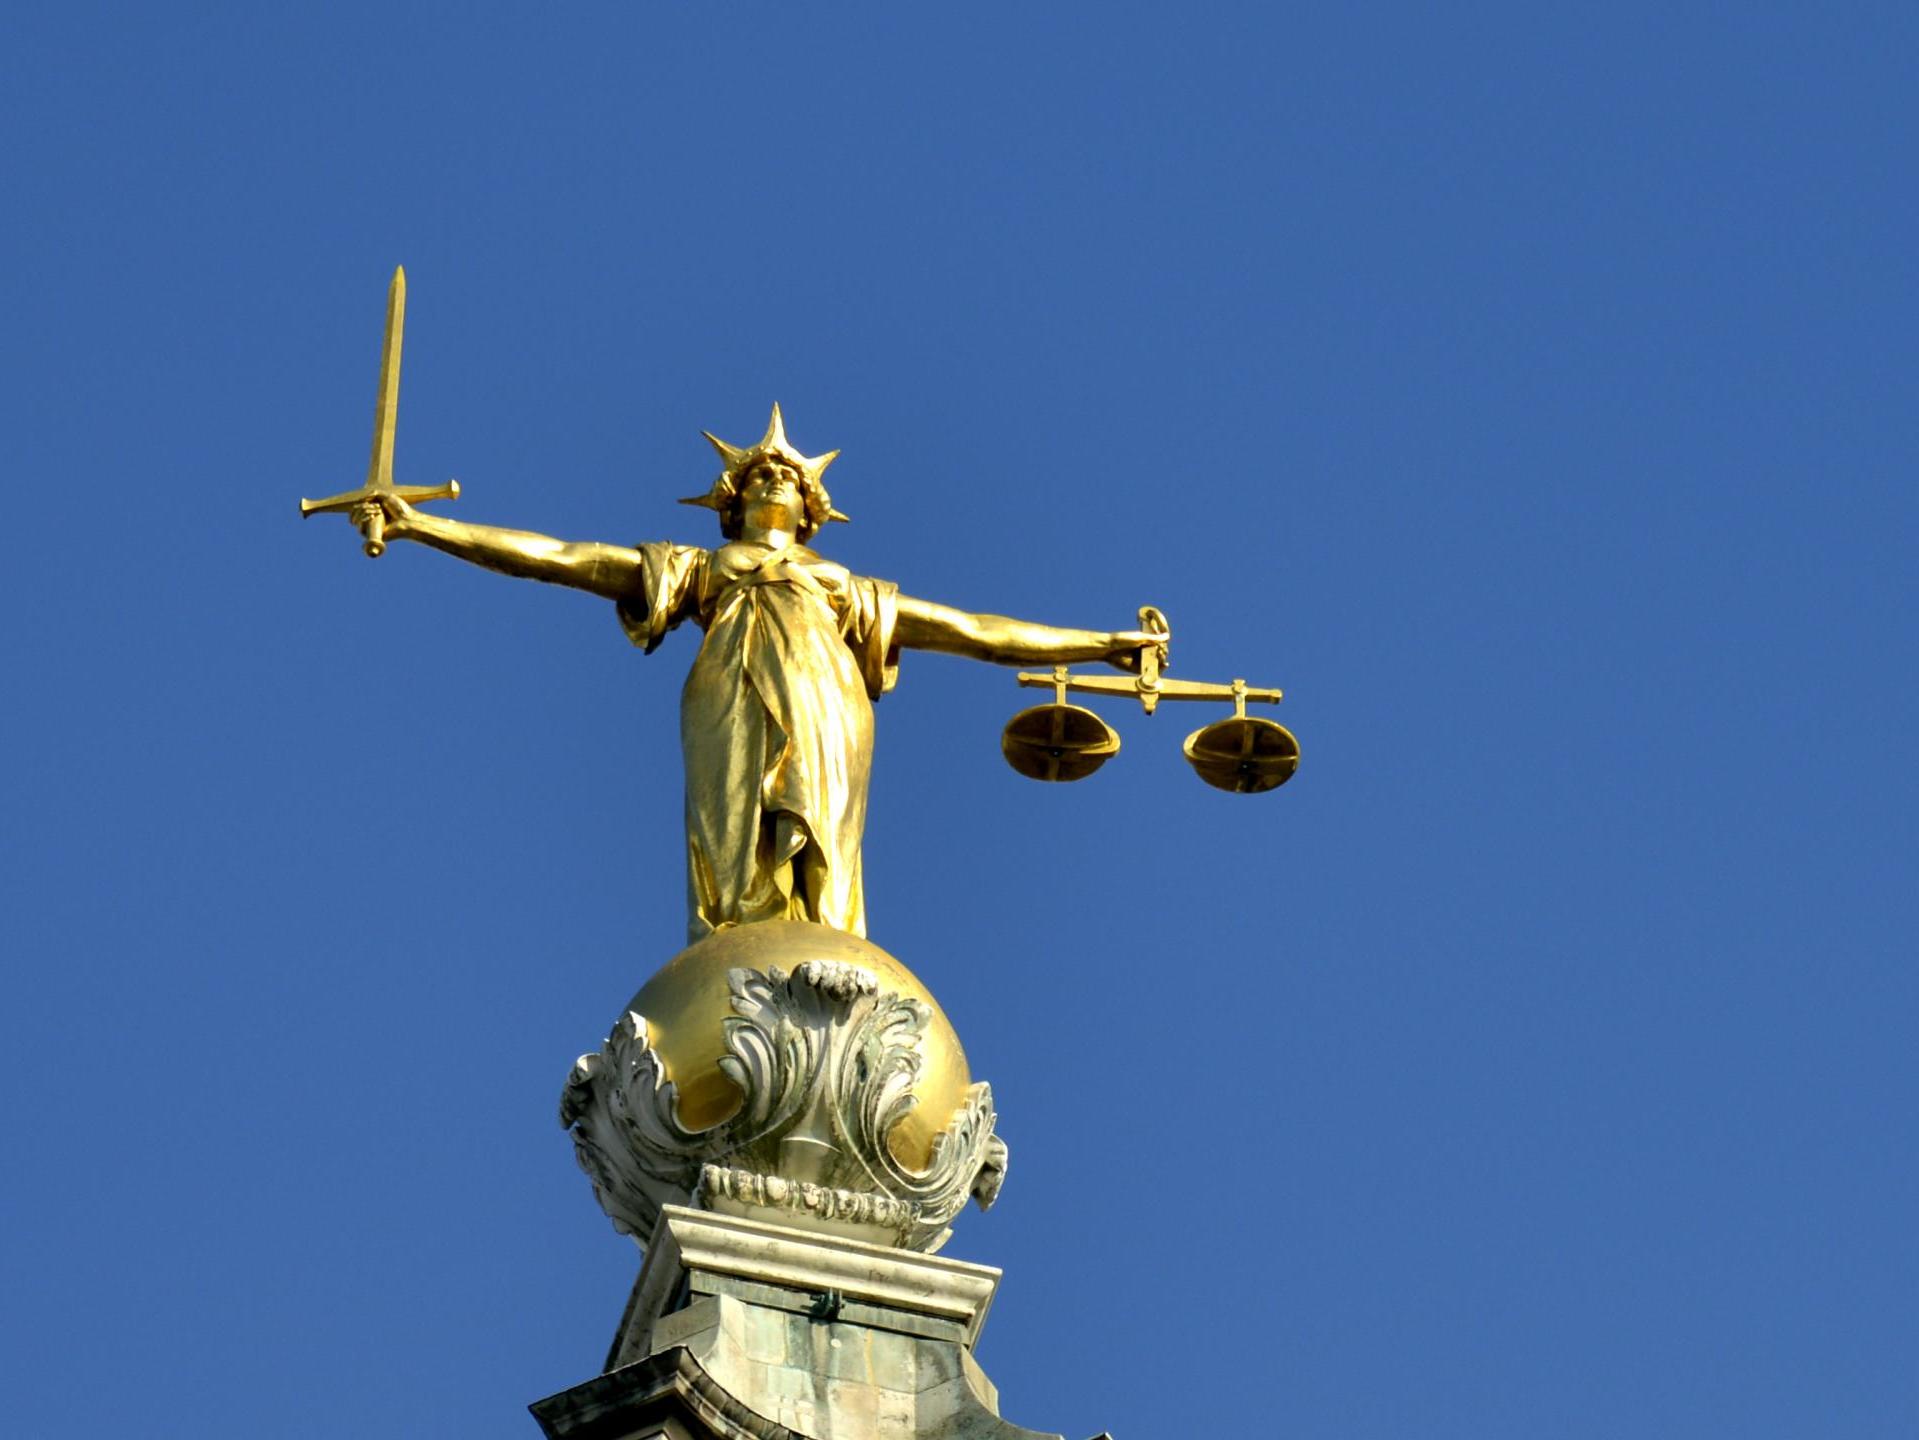 Judges need consent training as courts are 'no longer seen as safe place for women', say lawyers